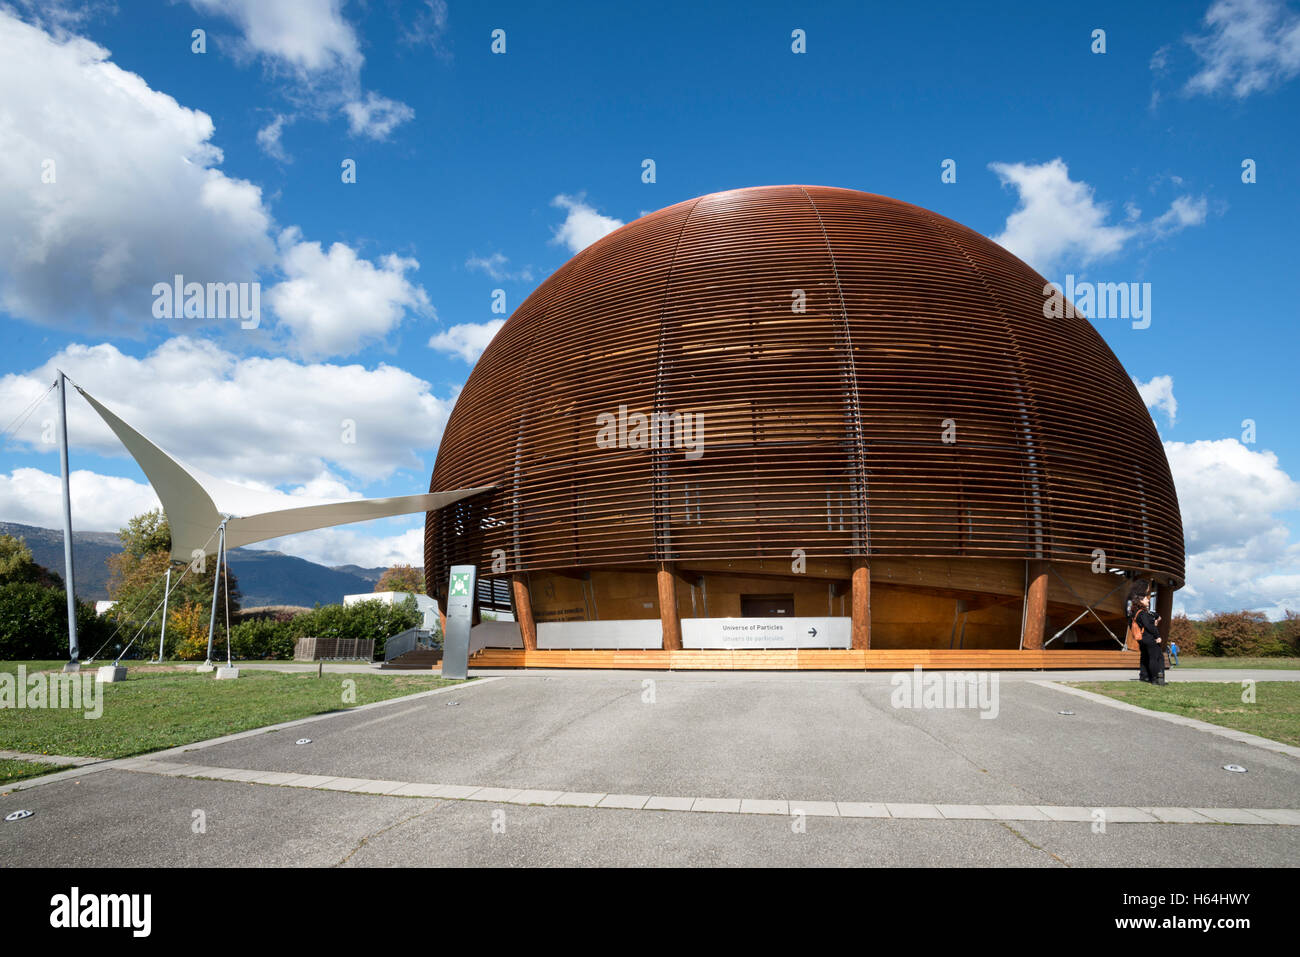 Globe of Science and Innovation, CERN research centre, Meyrin, Switzerland Stock Photo